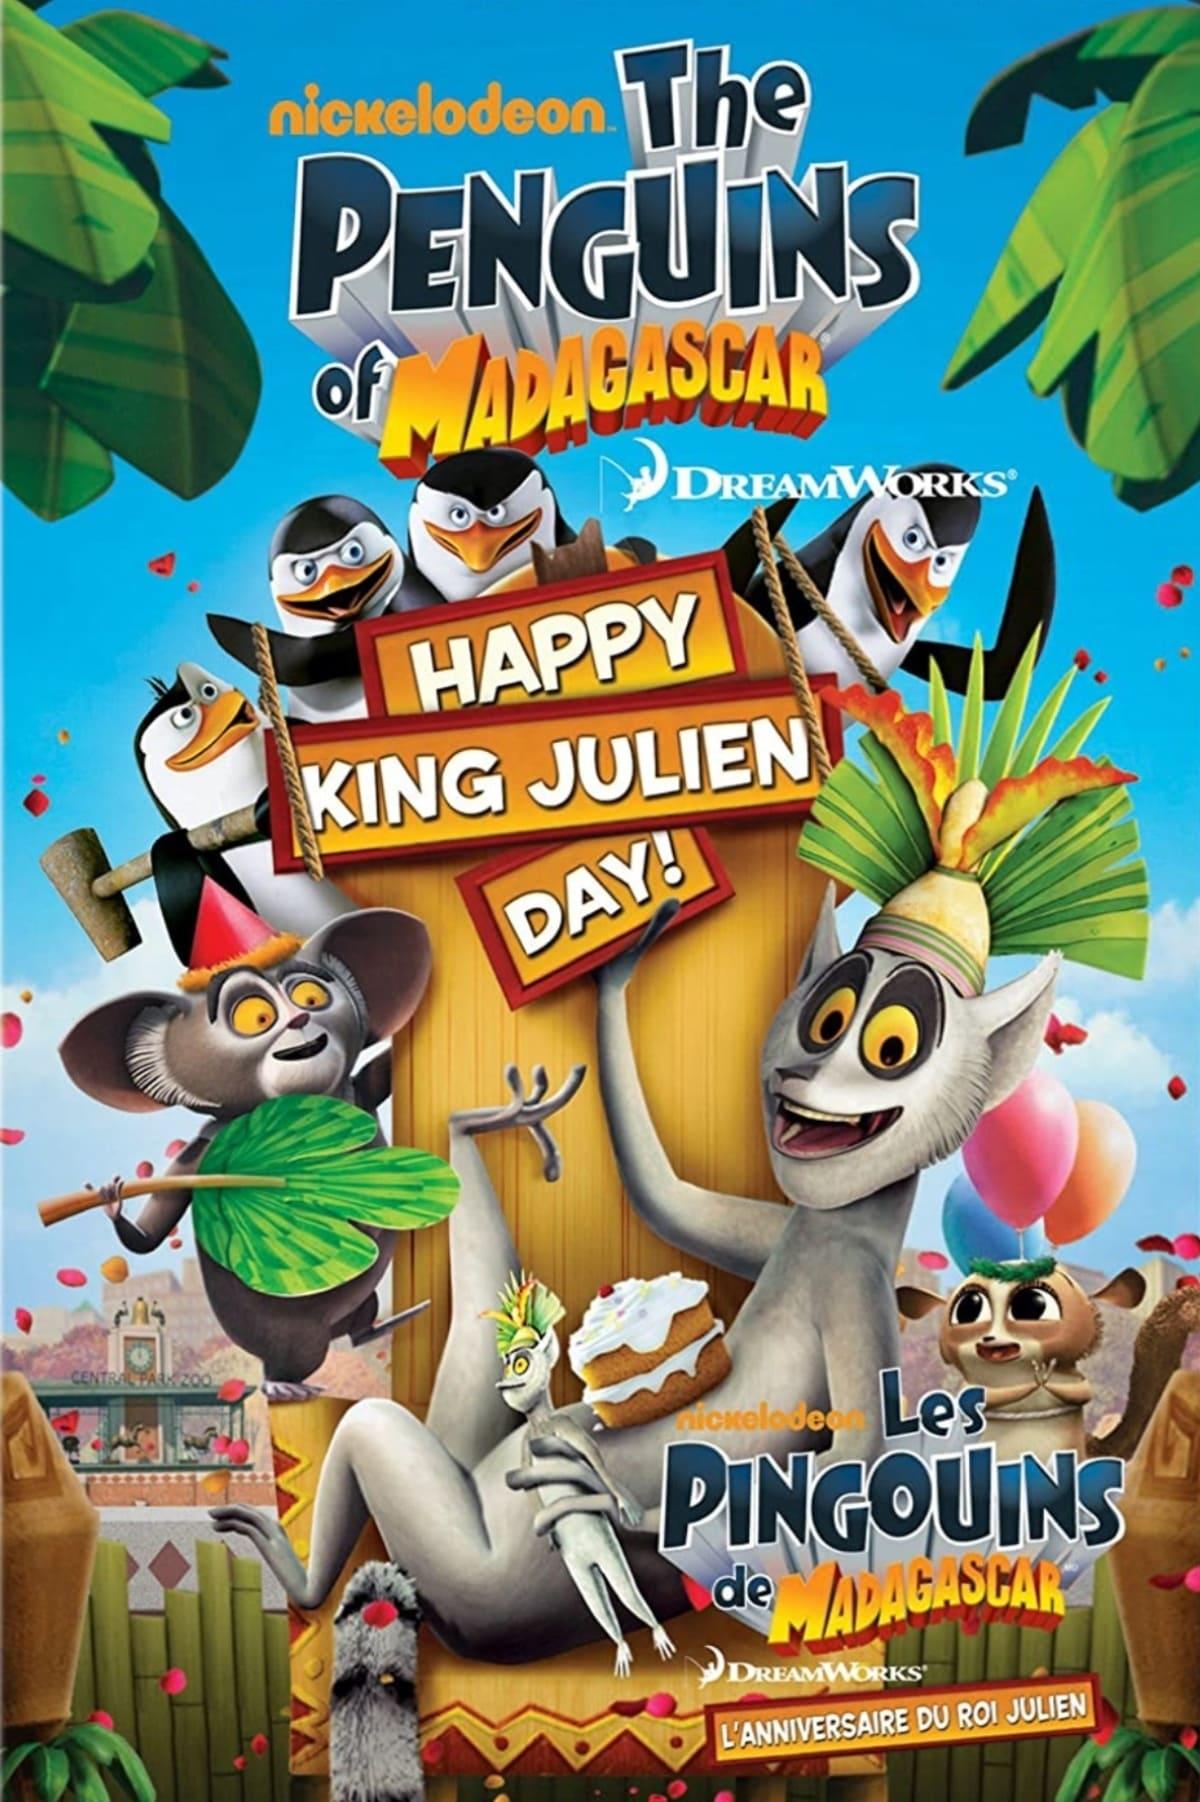 The Penguins of Madagascar: Happy King Julien Day poster